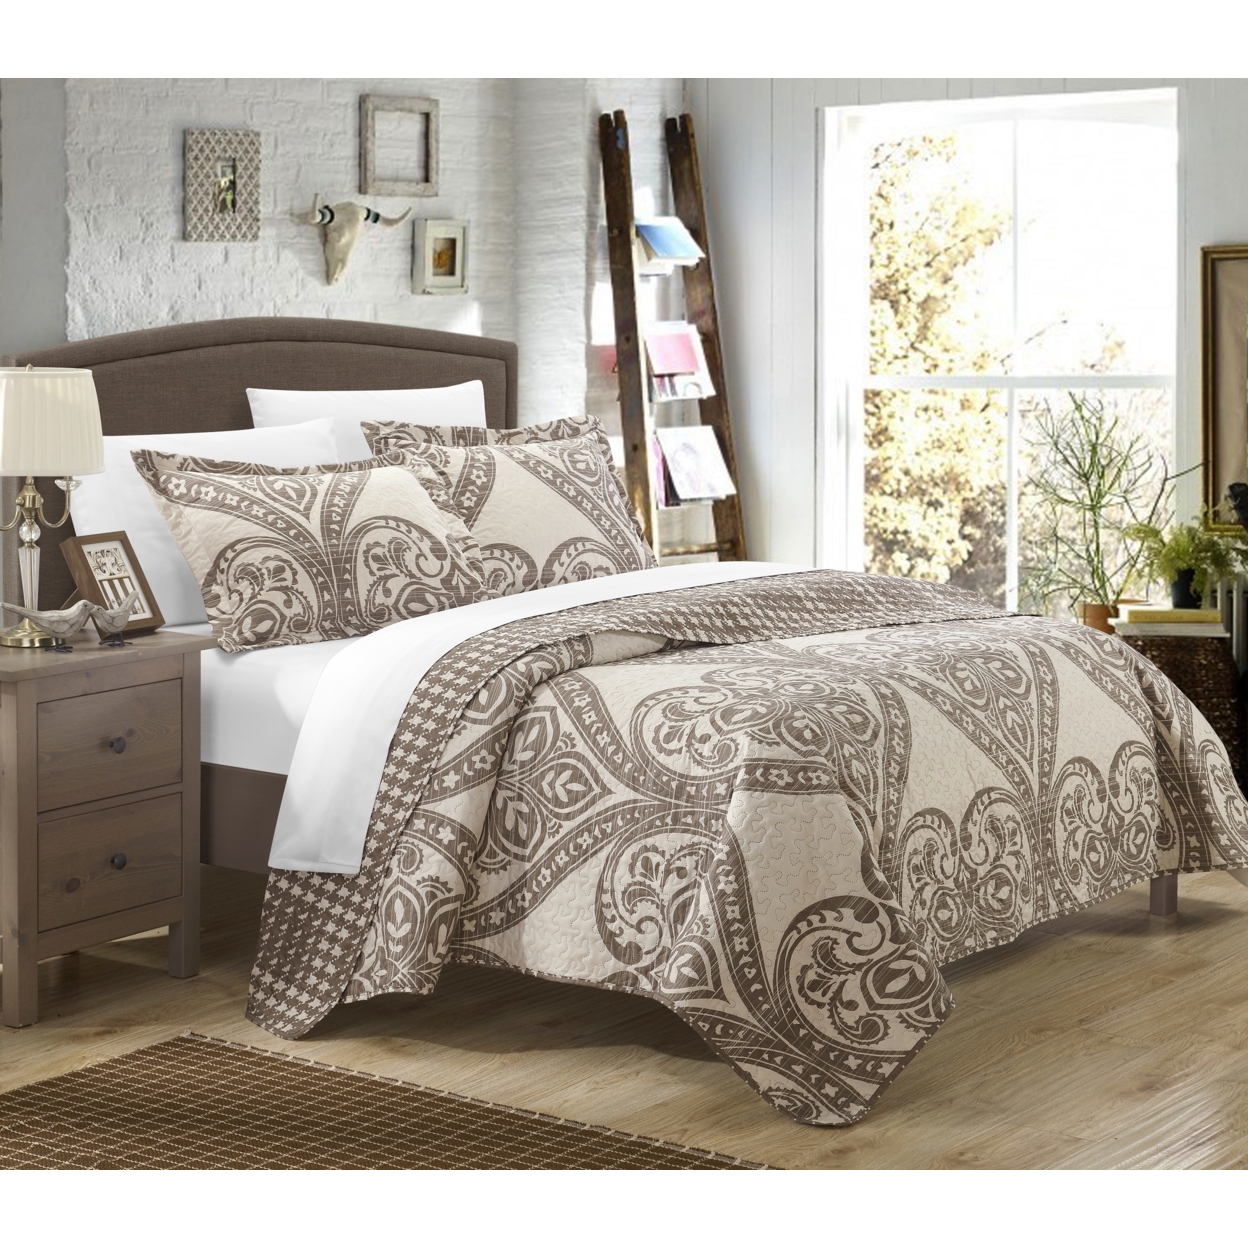 3 Or 2 Piece Revenna REVERSIBLE Printed Quilt Set. Front A Traditional Pattern And Reverses Into A Houndstooth Pattern - Beige, Twin